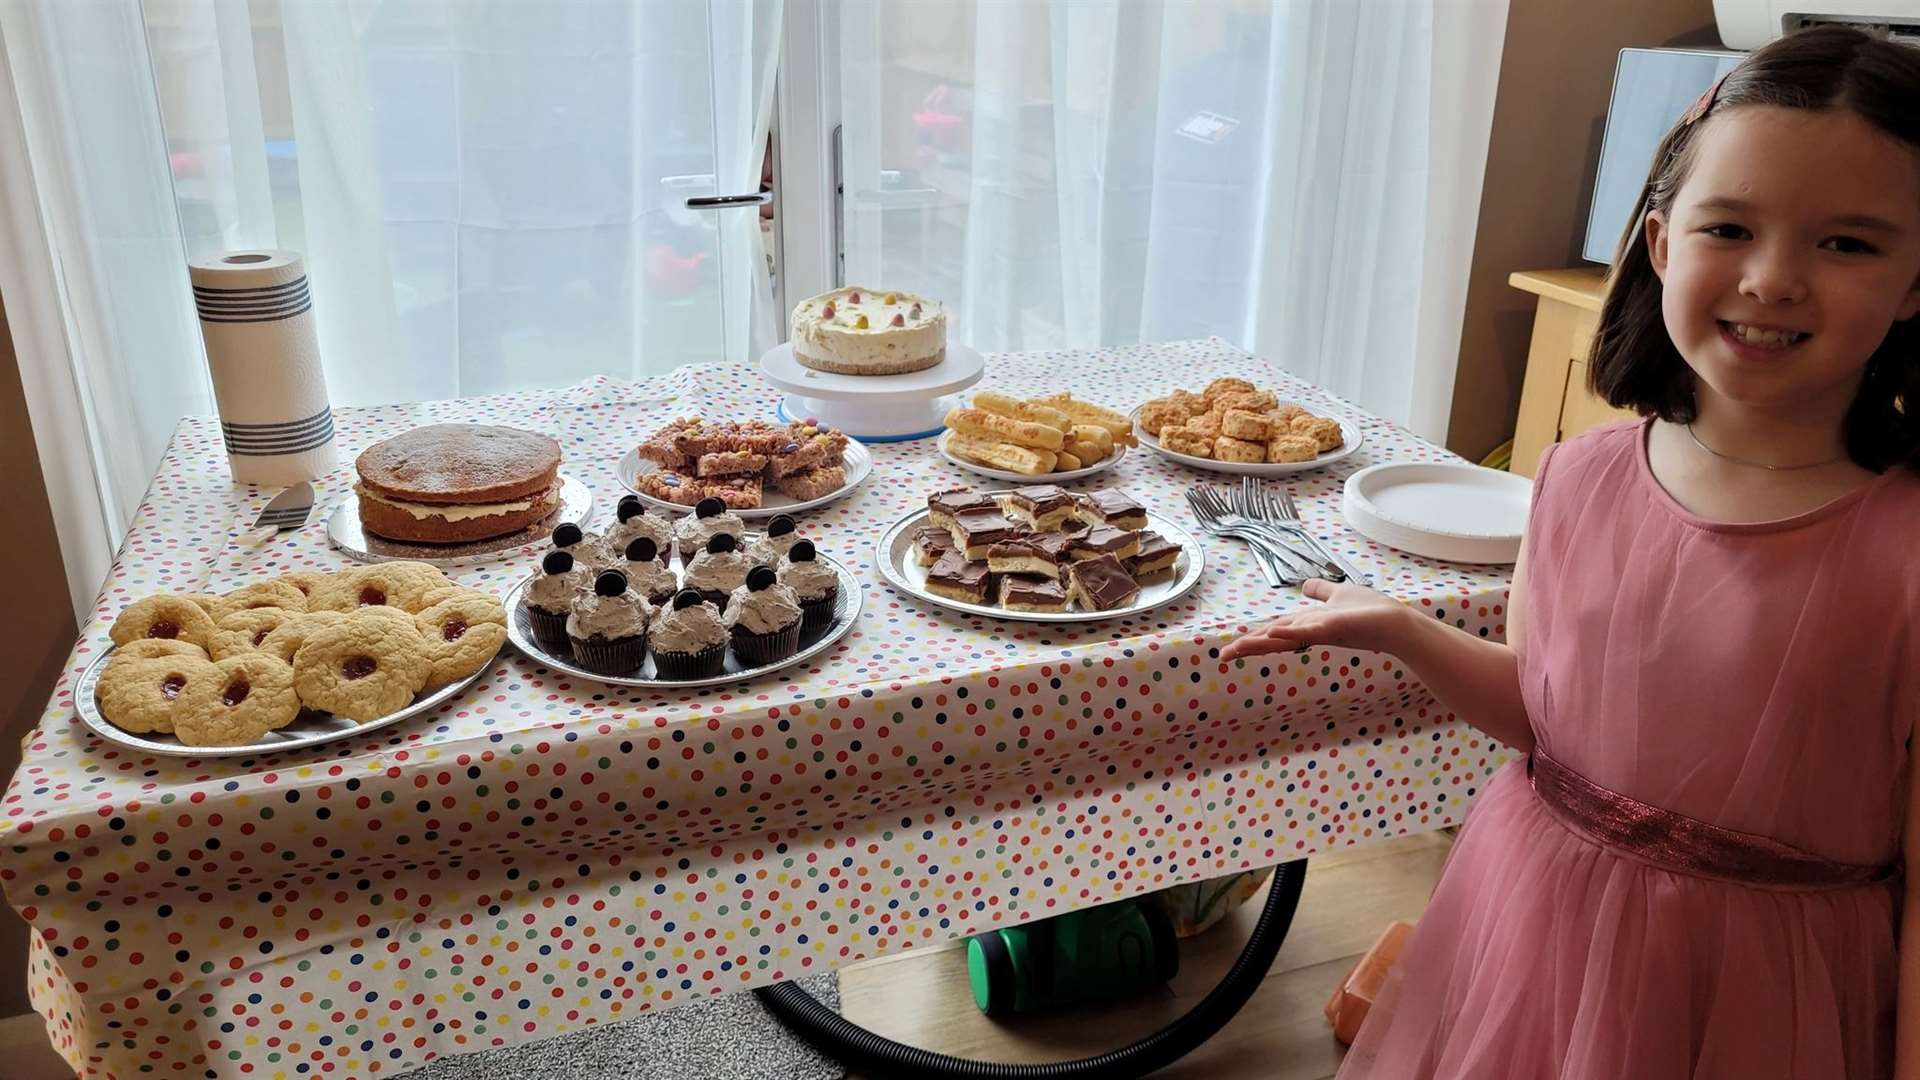 Sophie Gardner, from Faversham, decided to raise money for East Kent Hospitals Charity with a bake sale. Picture: East Kent Hospitals NHS